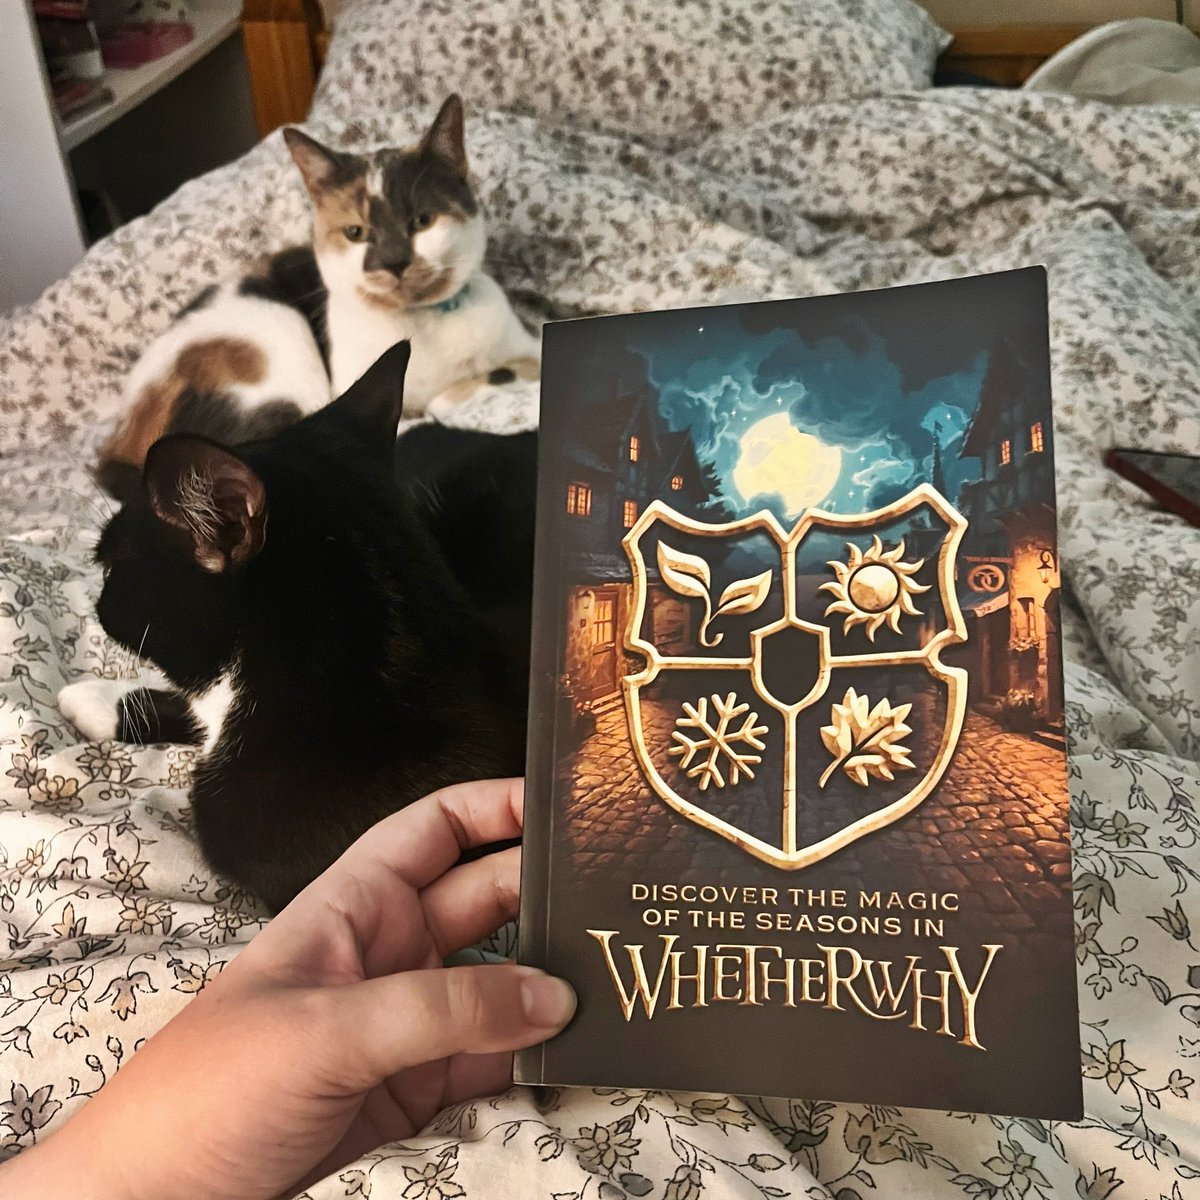 Brimming with cozy charm, WHETHERWHY is a wonderful tale of magic, friendship and bravery that will enchant readers for years to come. Bravo @acaseforbooks